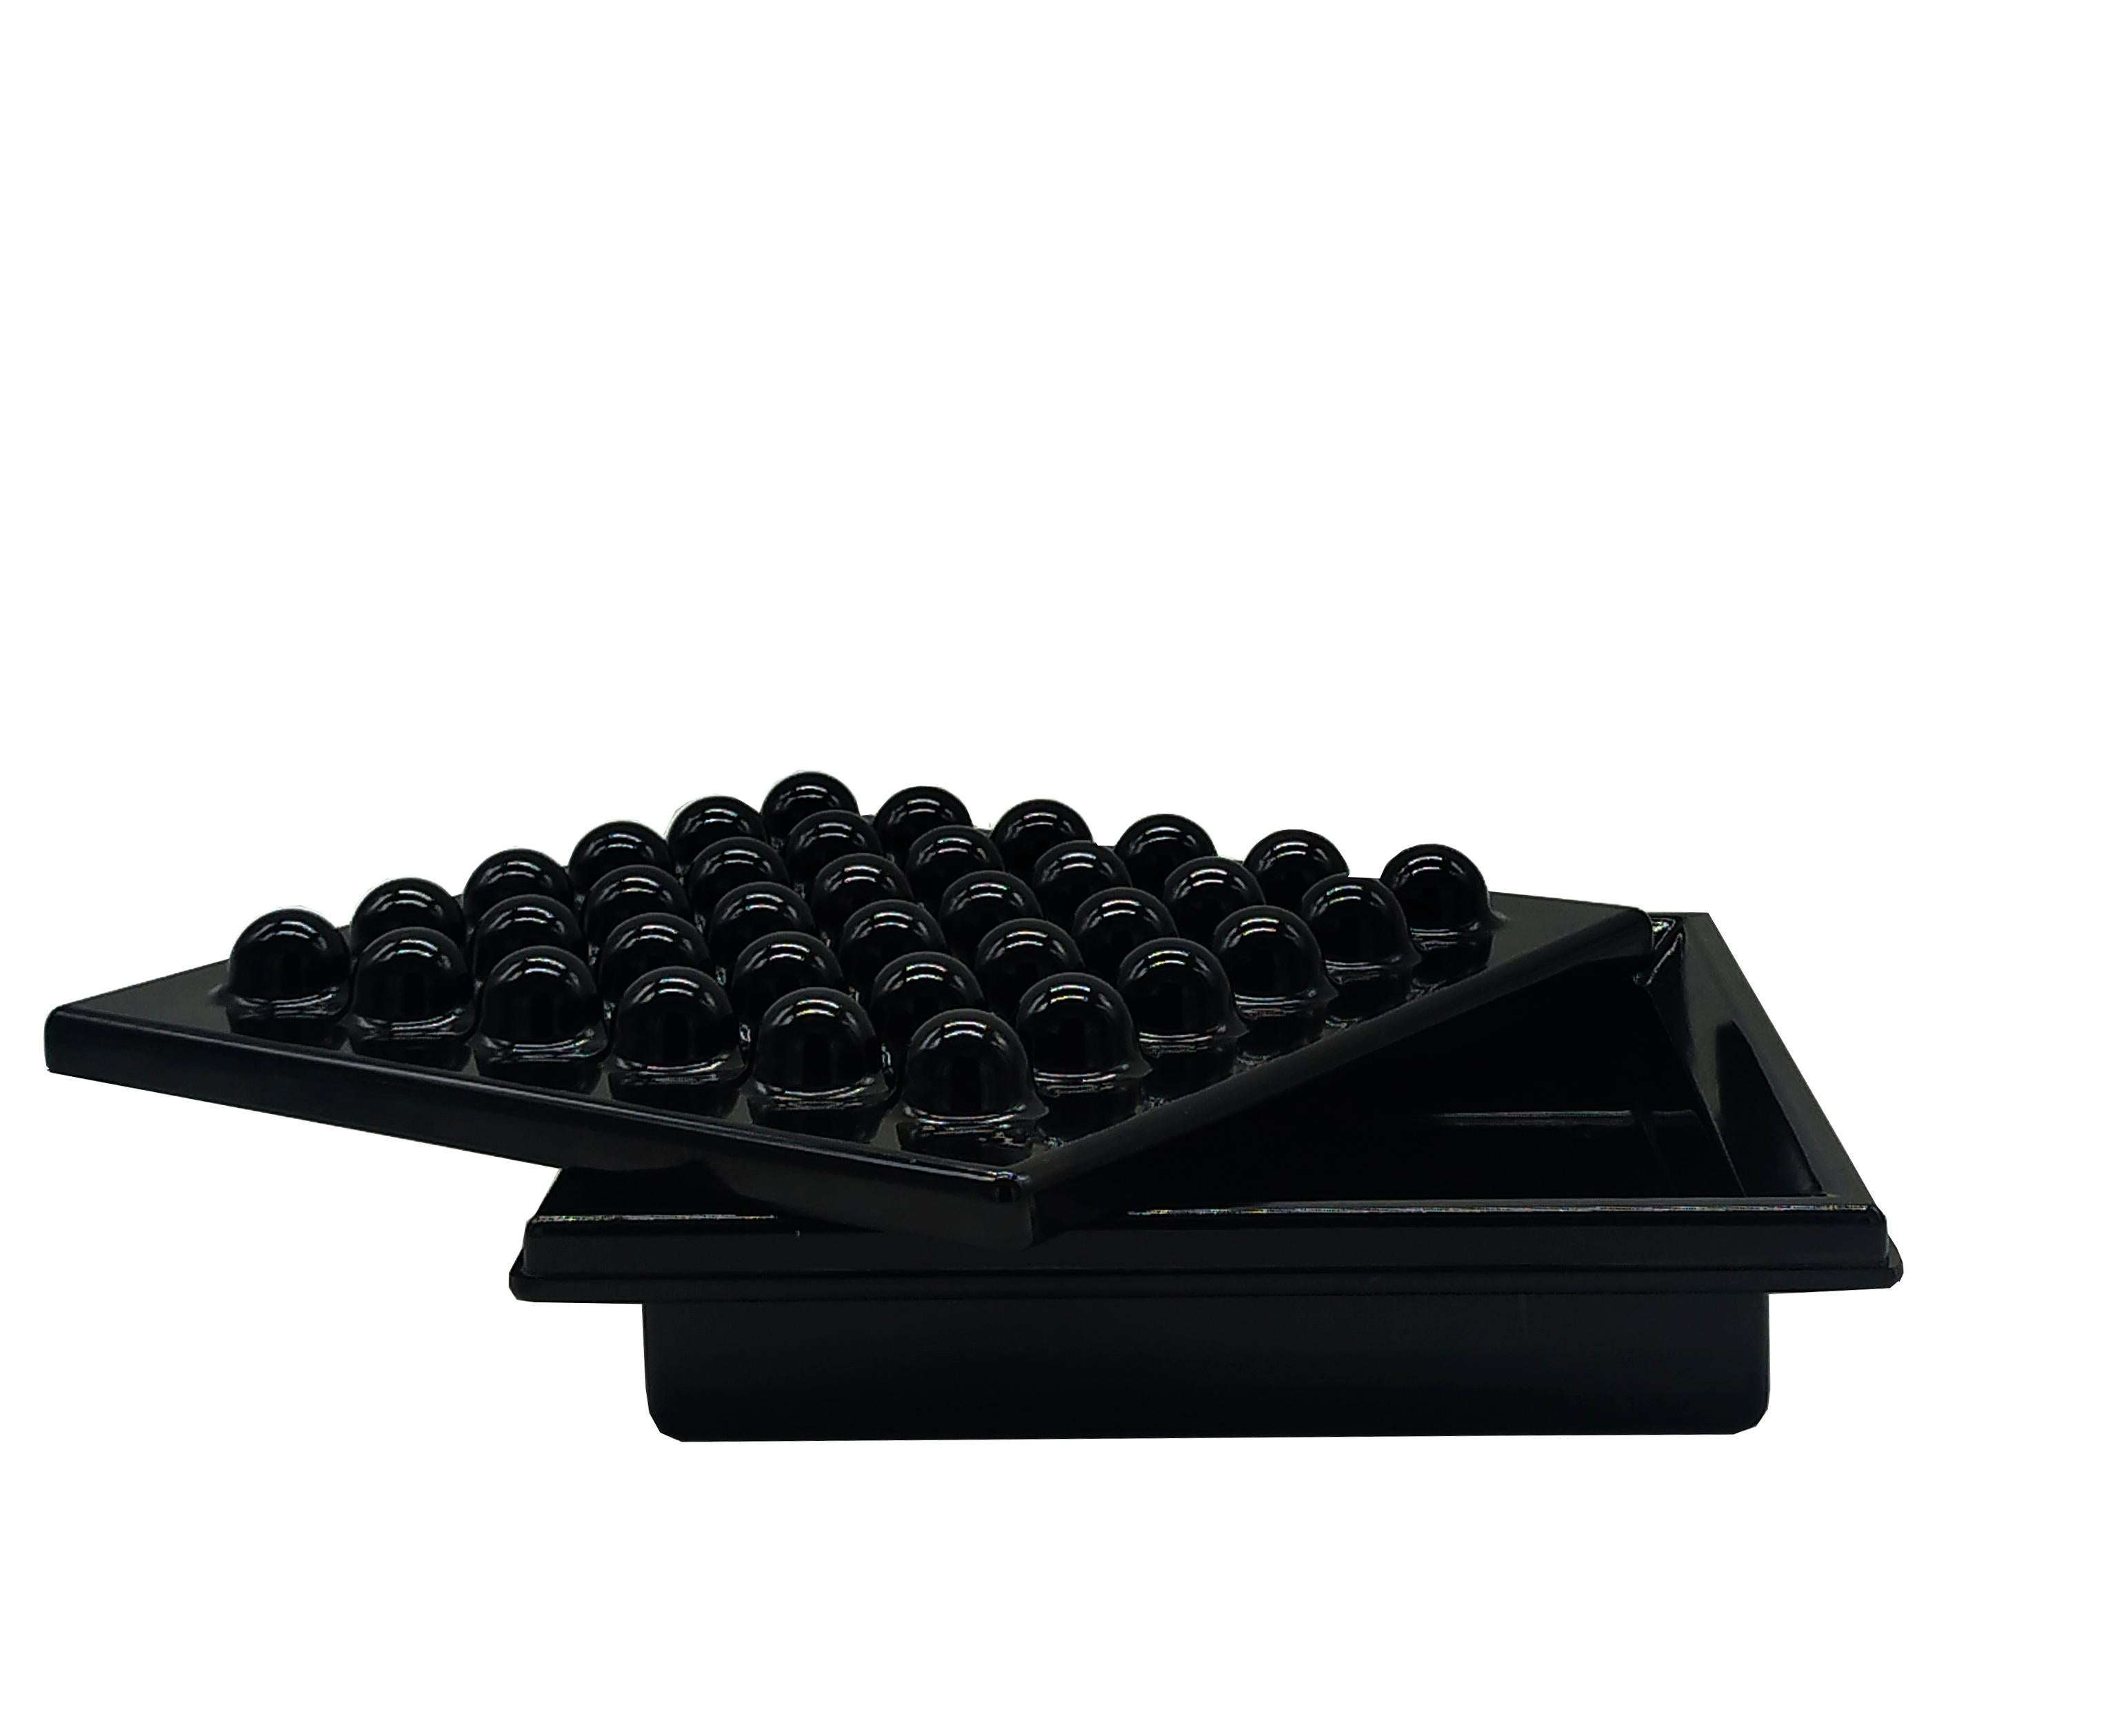 Large black ABS ashtray, Ettore Sottsass for Olivetti Synthesis, Sistema 45 series, 1972.
 Iconic object from the revolutionary office furniture system Synthesis 45, presented by Olivetti in 1973 and designed by Ettore Sottsass. 
